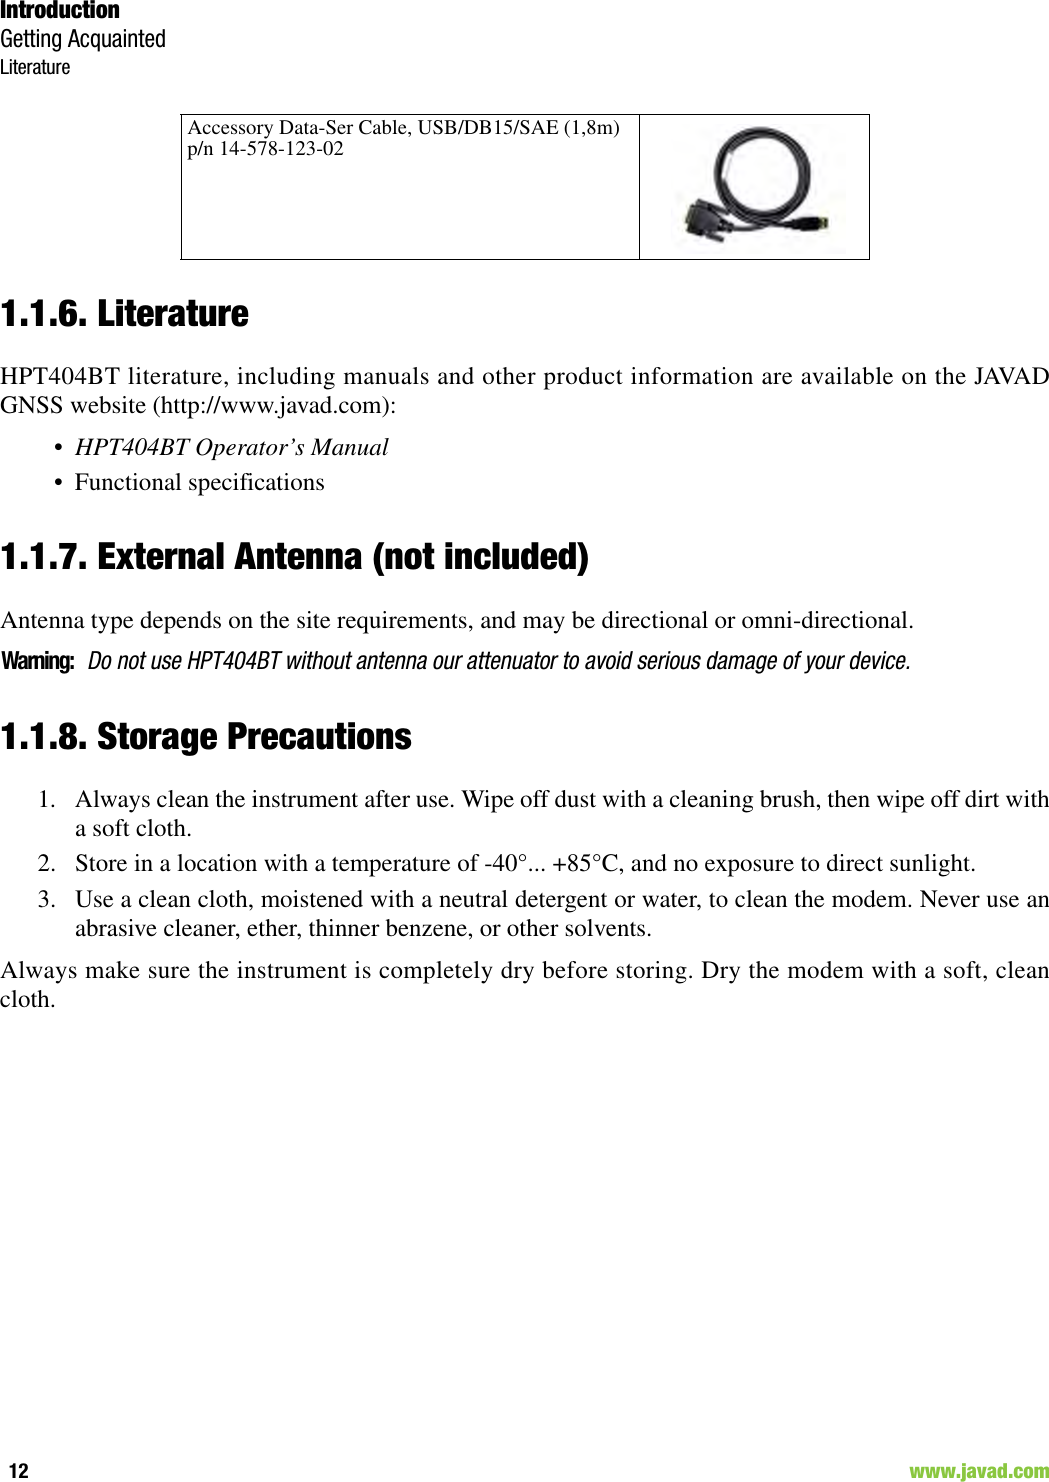 IntroductionGetting AcquaintedLiterature12                                                                                                                     www.javad.com1.1.6. LiteratureHPT404BT literature, including manuals and other product information are available on the JAVADGNSS website (http://www.javad.com):•HPT404BT Operator’s Manual• Functional specifications1.1.7. External Antenna (not included)Antenna type depends on the site requirements, and may be directional or omni-directional.Warning:Do not use HPT404BT without antenna our attenuator to avoid serious damage of your device.1.1.8. Storage Precautions1. Always clean the instrument after use. Wipe off dust with a cleaning brush, then wipe off dirt witha soft cloth.2. Store in a location with a temperature of -40°... +85°C, and no exposure to direct sunlight.3. Use a clean cloth, moistened with a neutral detergent or water, to clean the modem. Never use anabrasive cleaner, ether, thinner benzene, or other solvents.Always make sure the instrument is completely dry before storing. Dry the modem with a soft, cleancloth.Accessory Data-Ser Cable, USB/DB15/SAE (1,8m)p/n 14-578-123-02